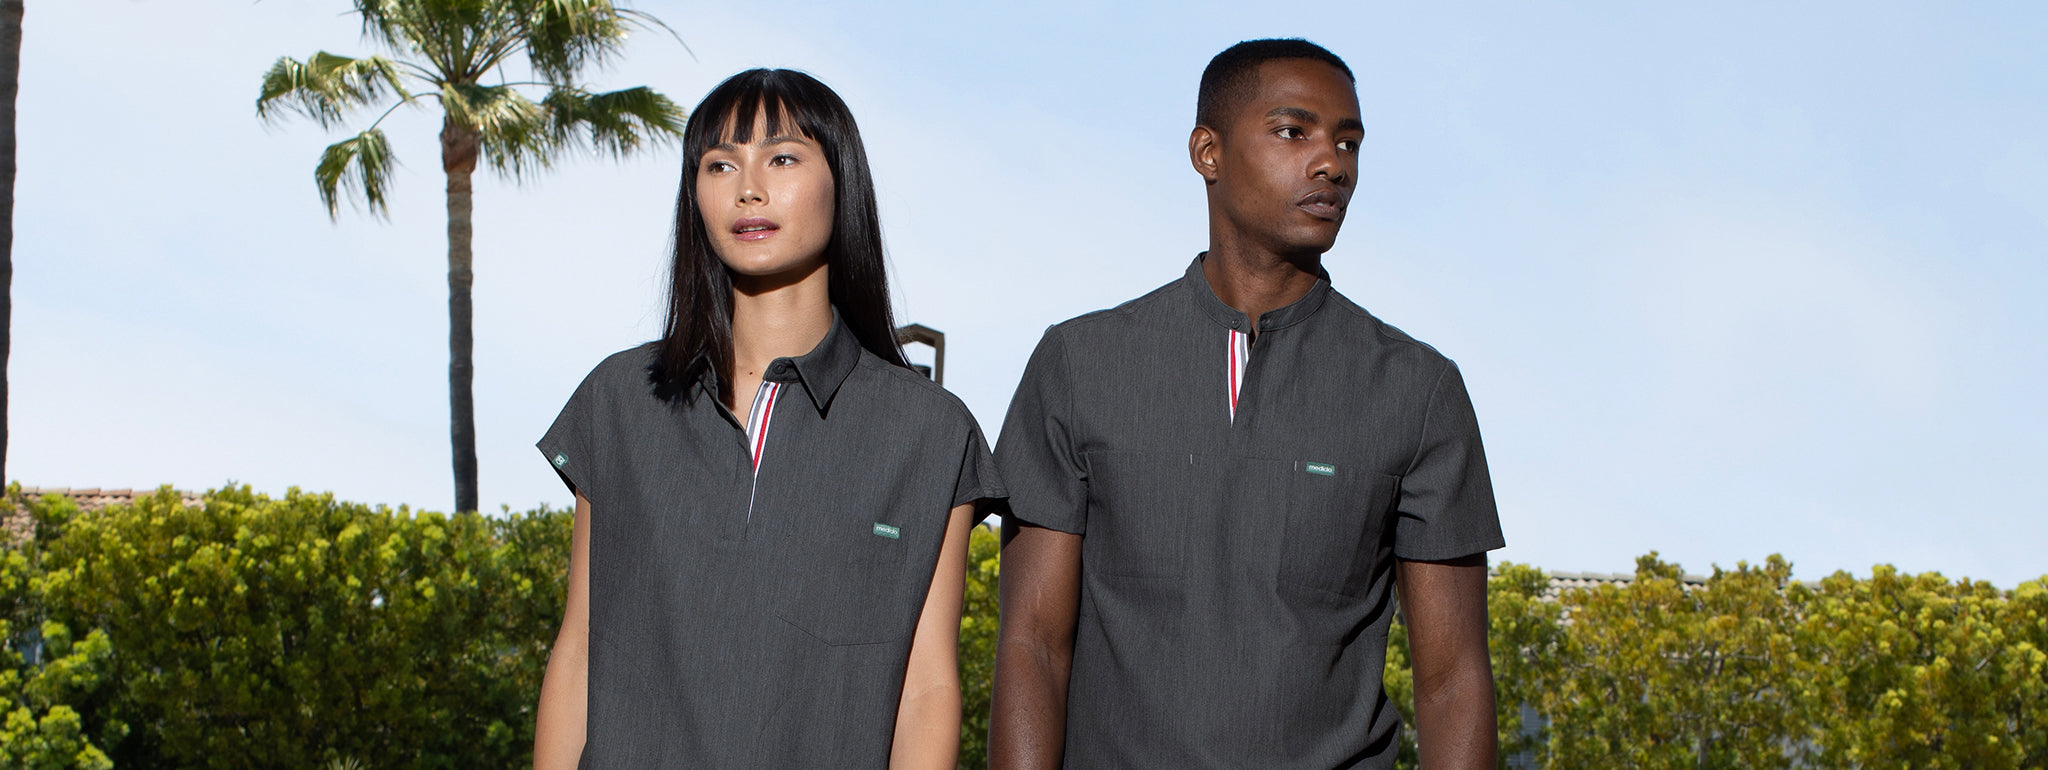 Shop Sustainable Scrubs: Plant Based & Recycled Material Medical Scrubs | MEDICLO®